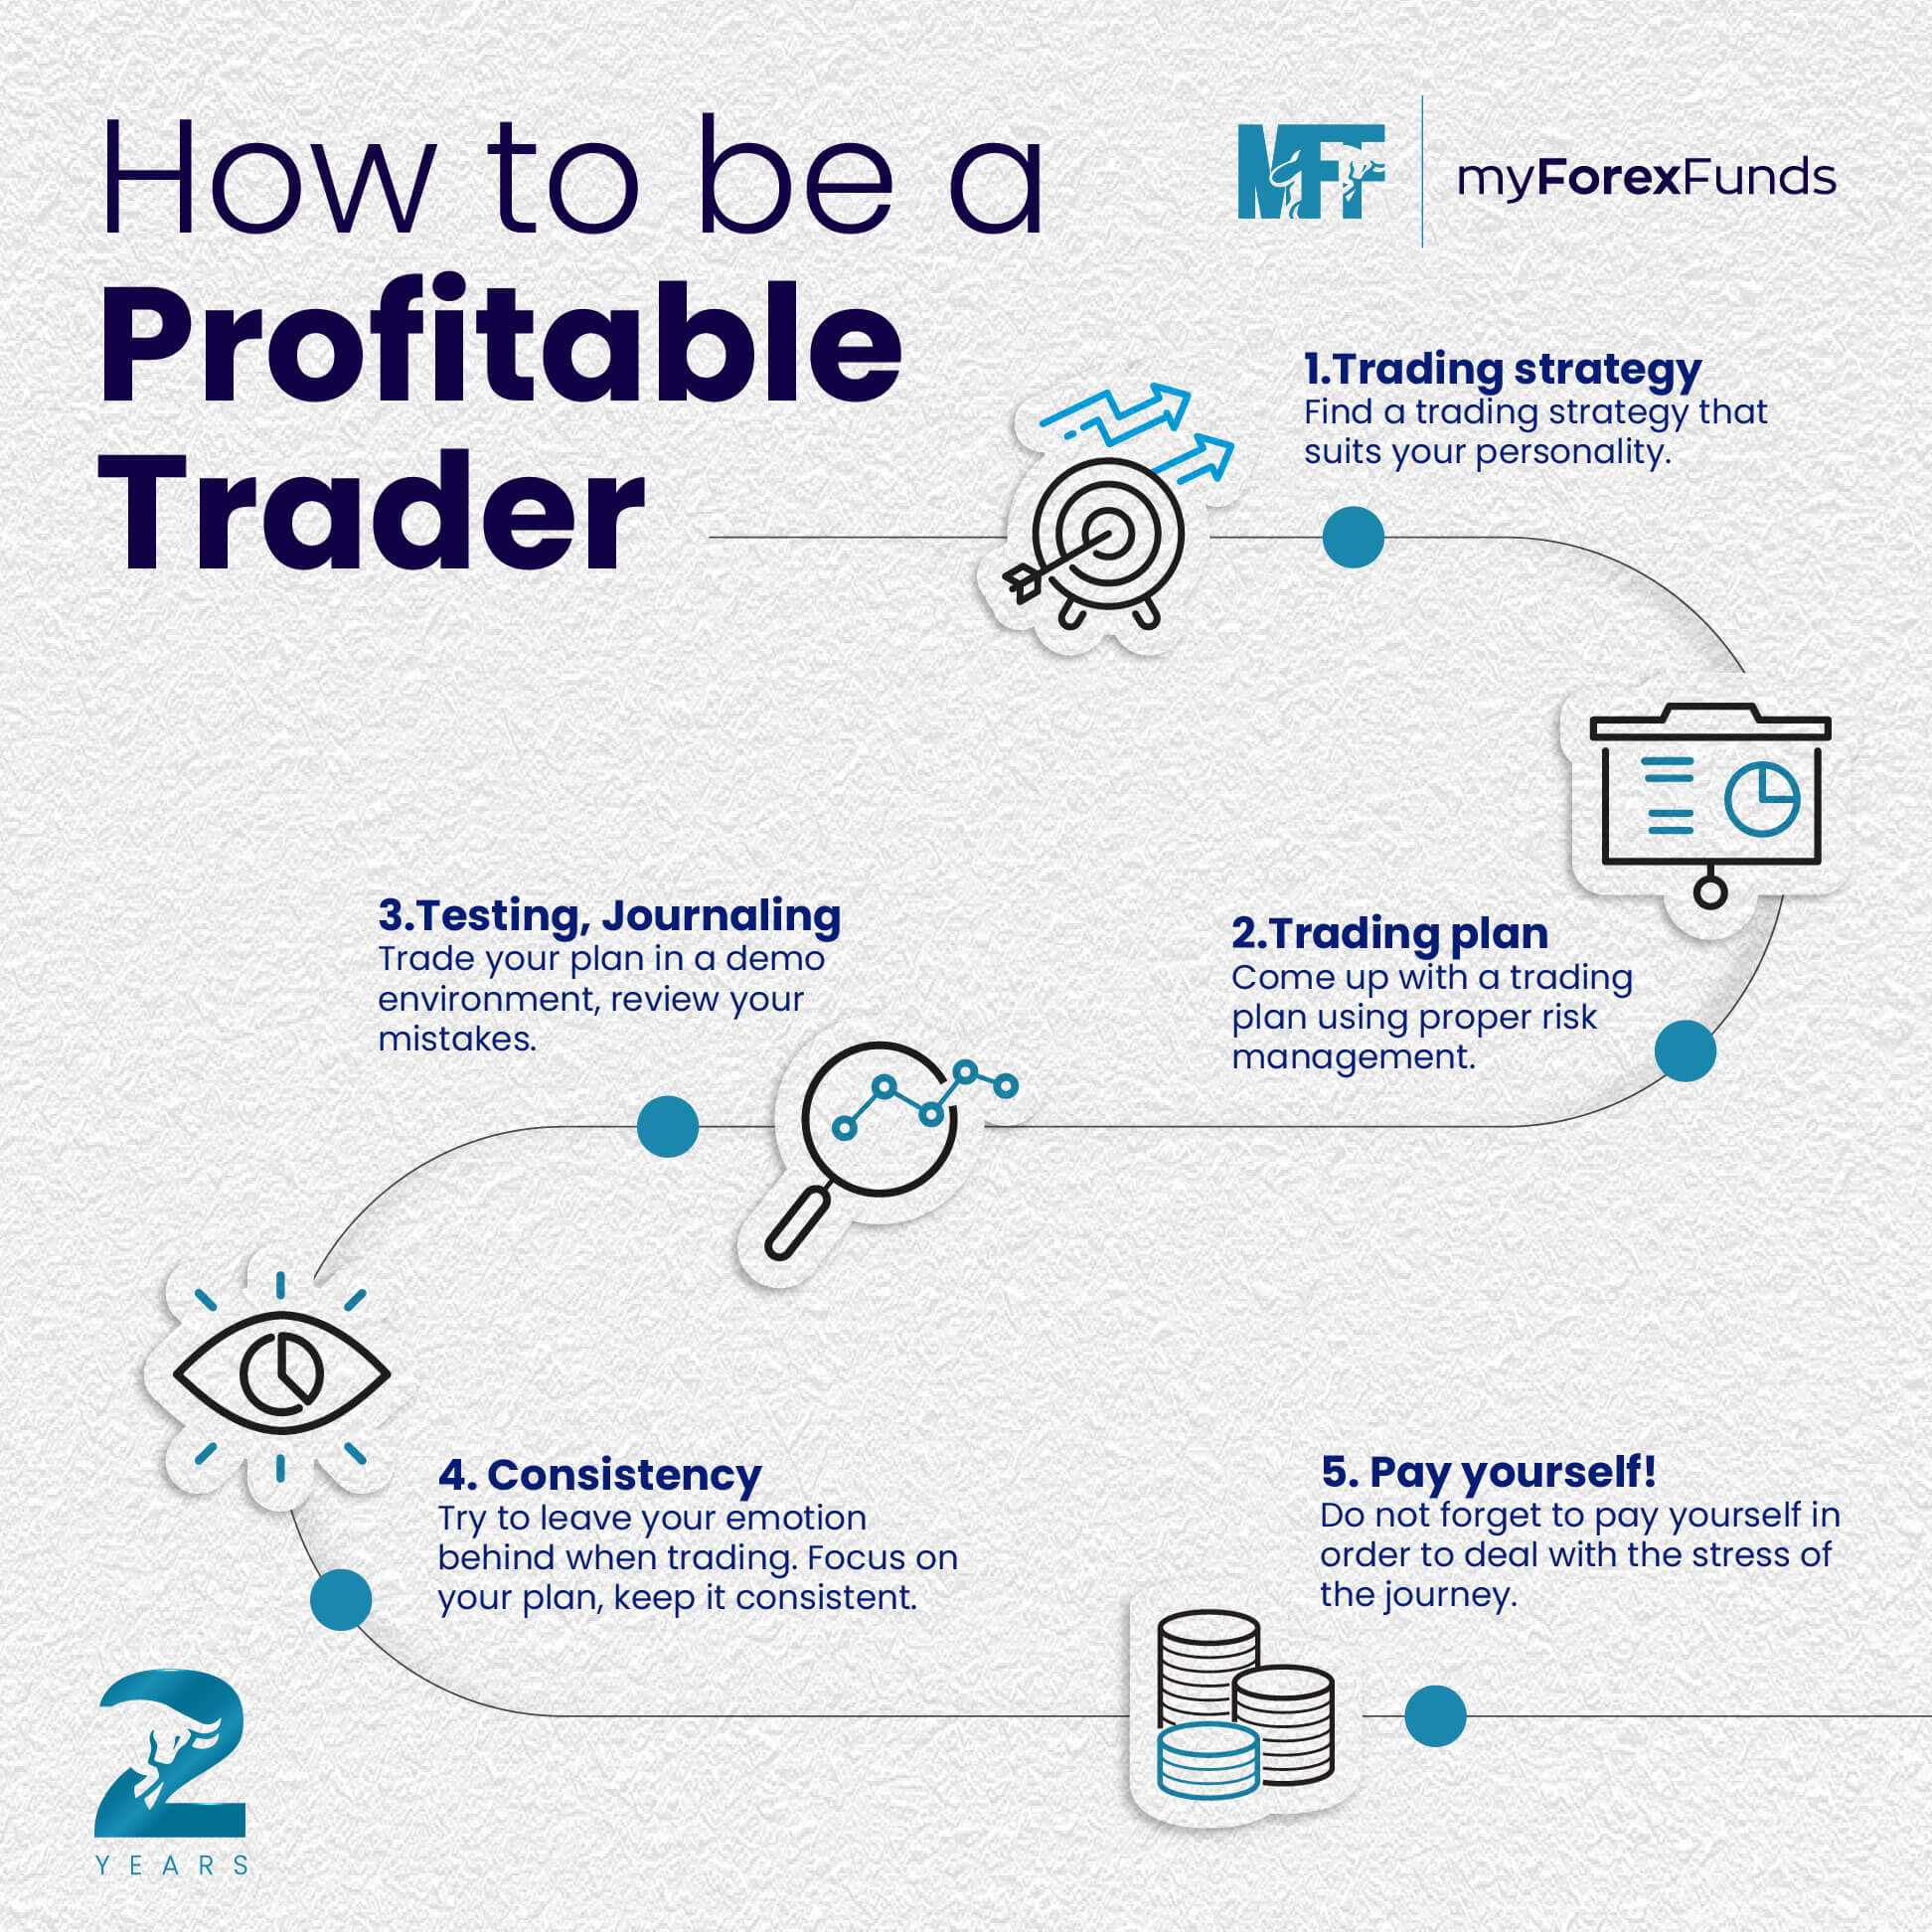 Find a Trading Style That Suits Your Personality.